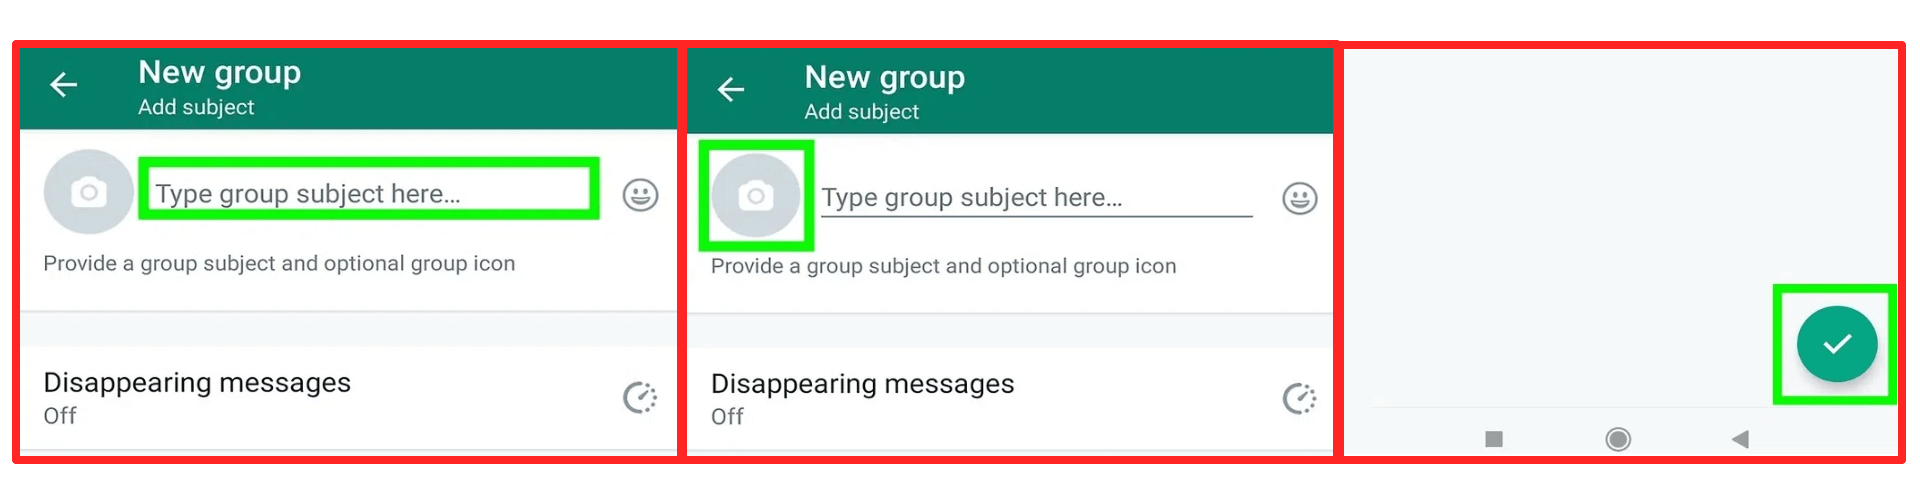 how do i make a gc(group chats) on whatsapp